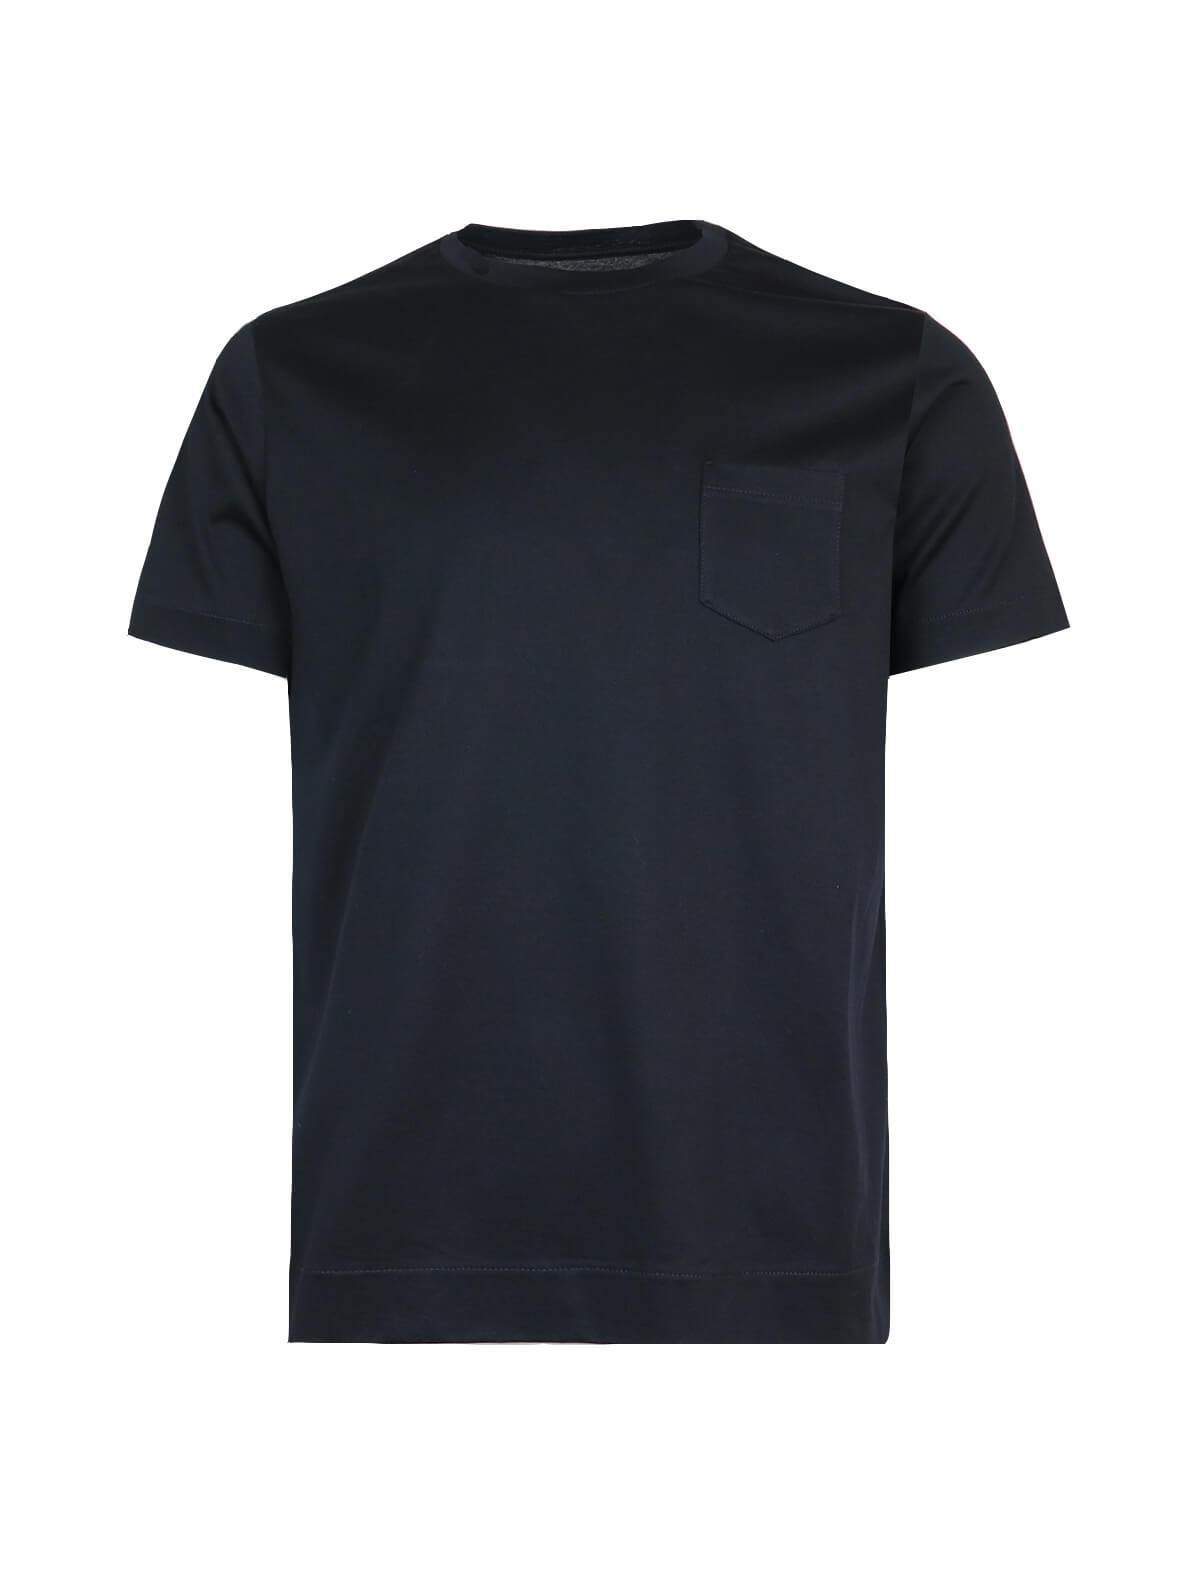 CIRCOLO 1901 Cotton T-Shirt with Front Pocket in Black | CLOSET Singapore